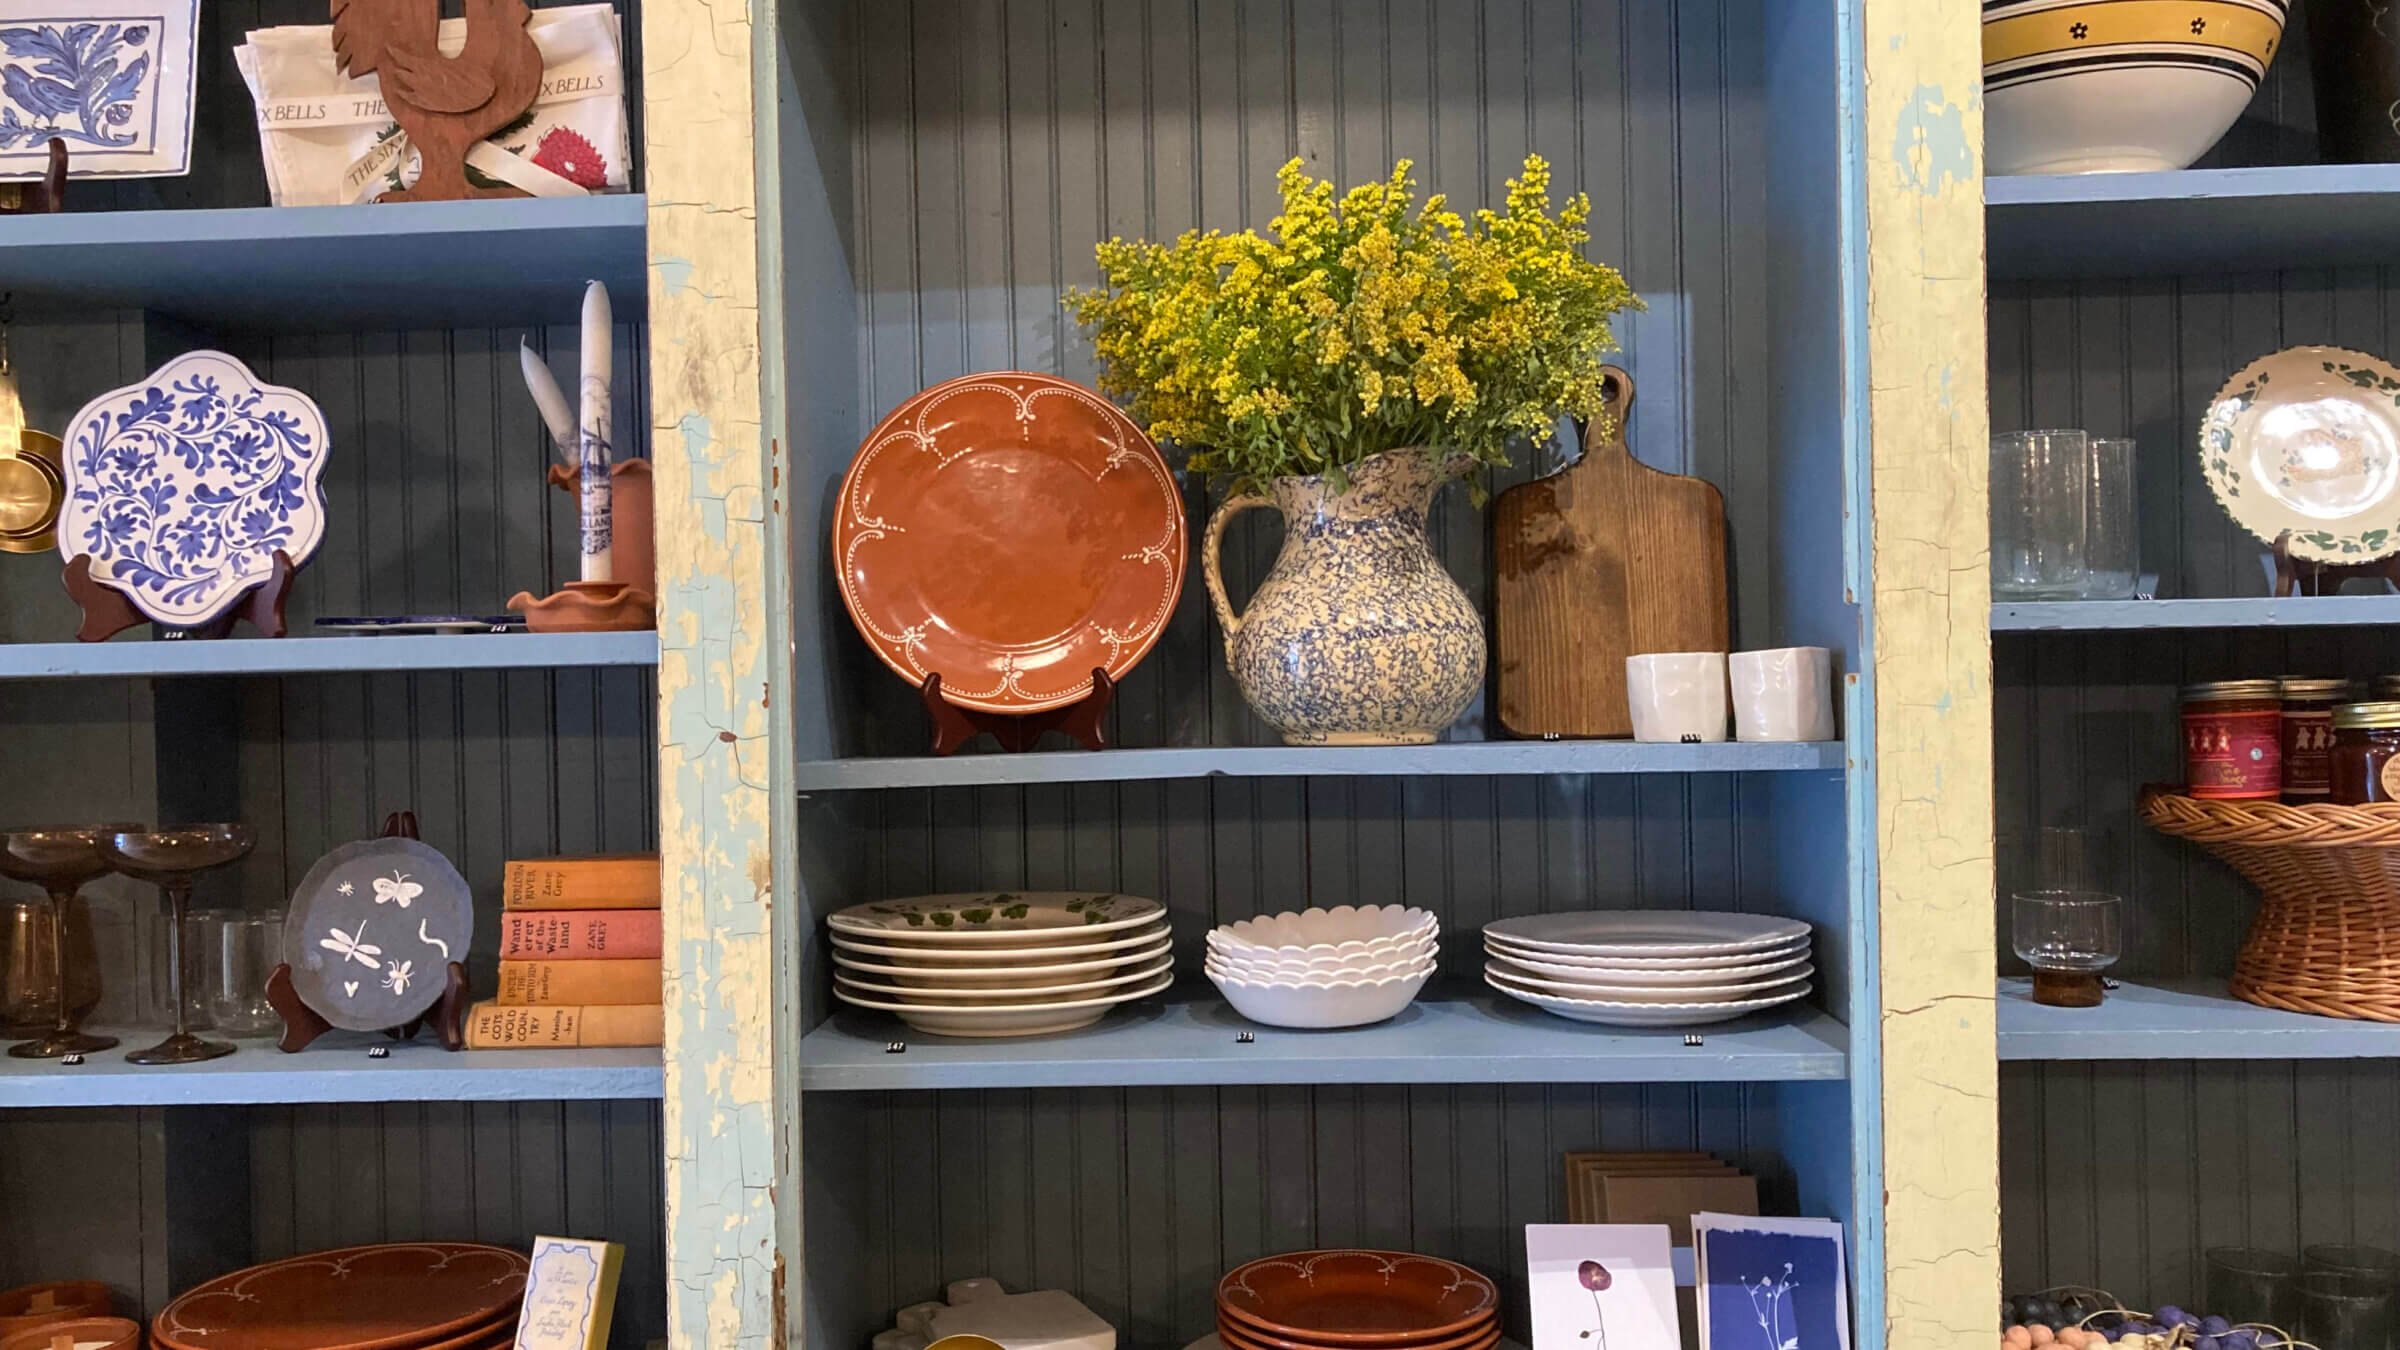 Carefully weathered shelves house rustic-chic dinnerware at The Six Bells.